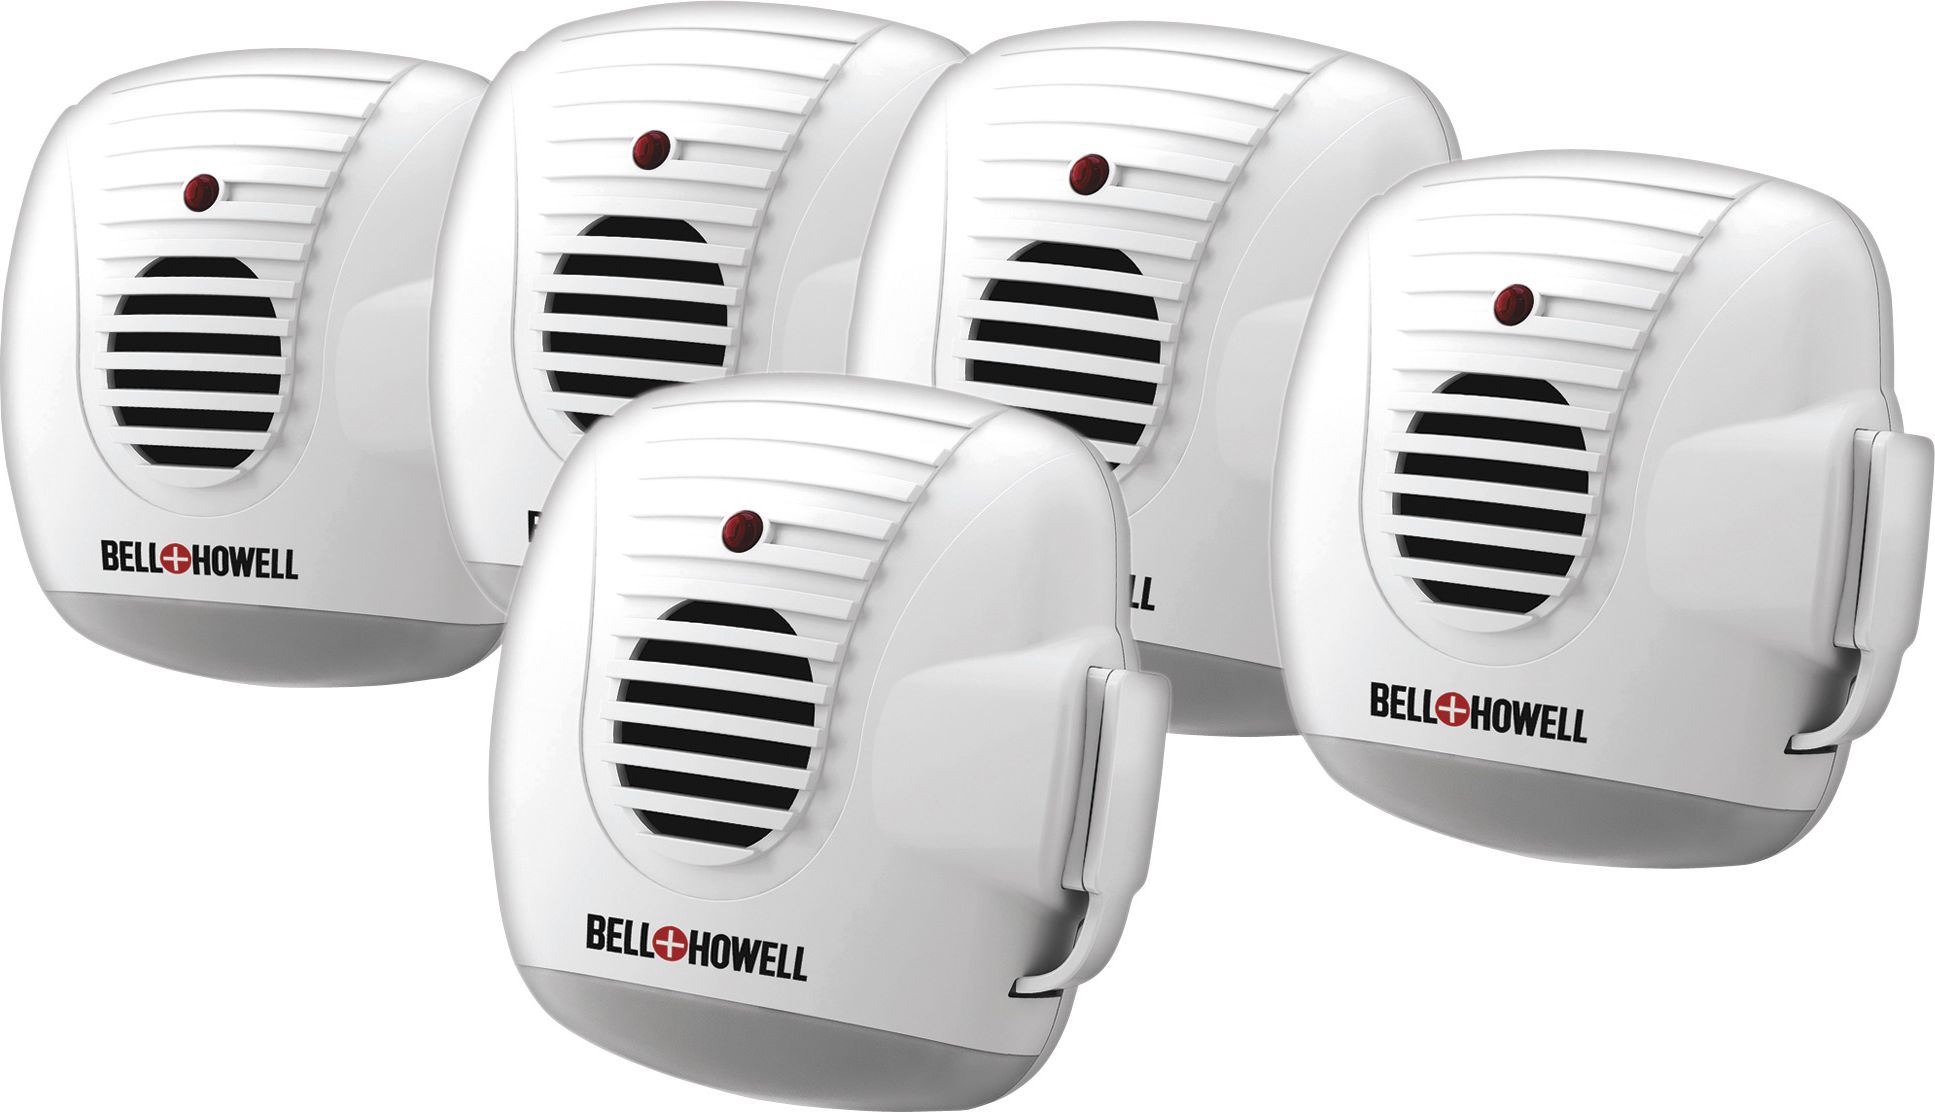 Pest Repellers w/ Extra Outlet 3 Pack – Bell + Howell